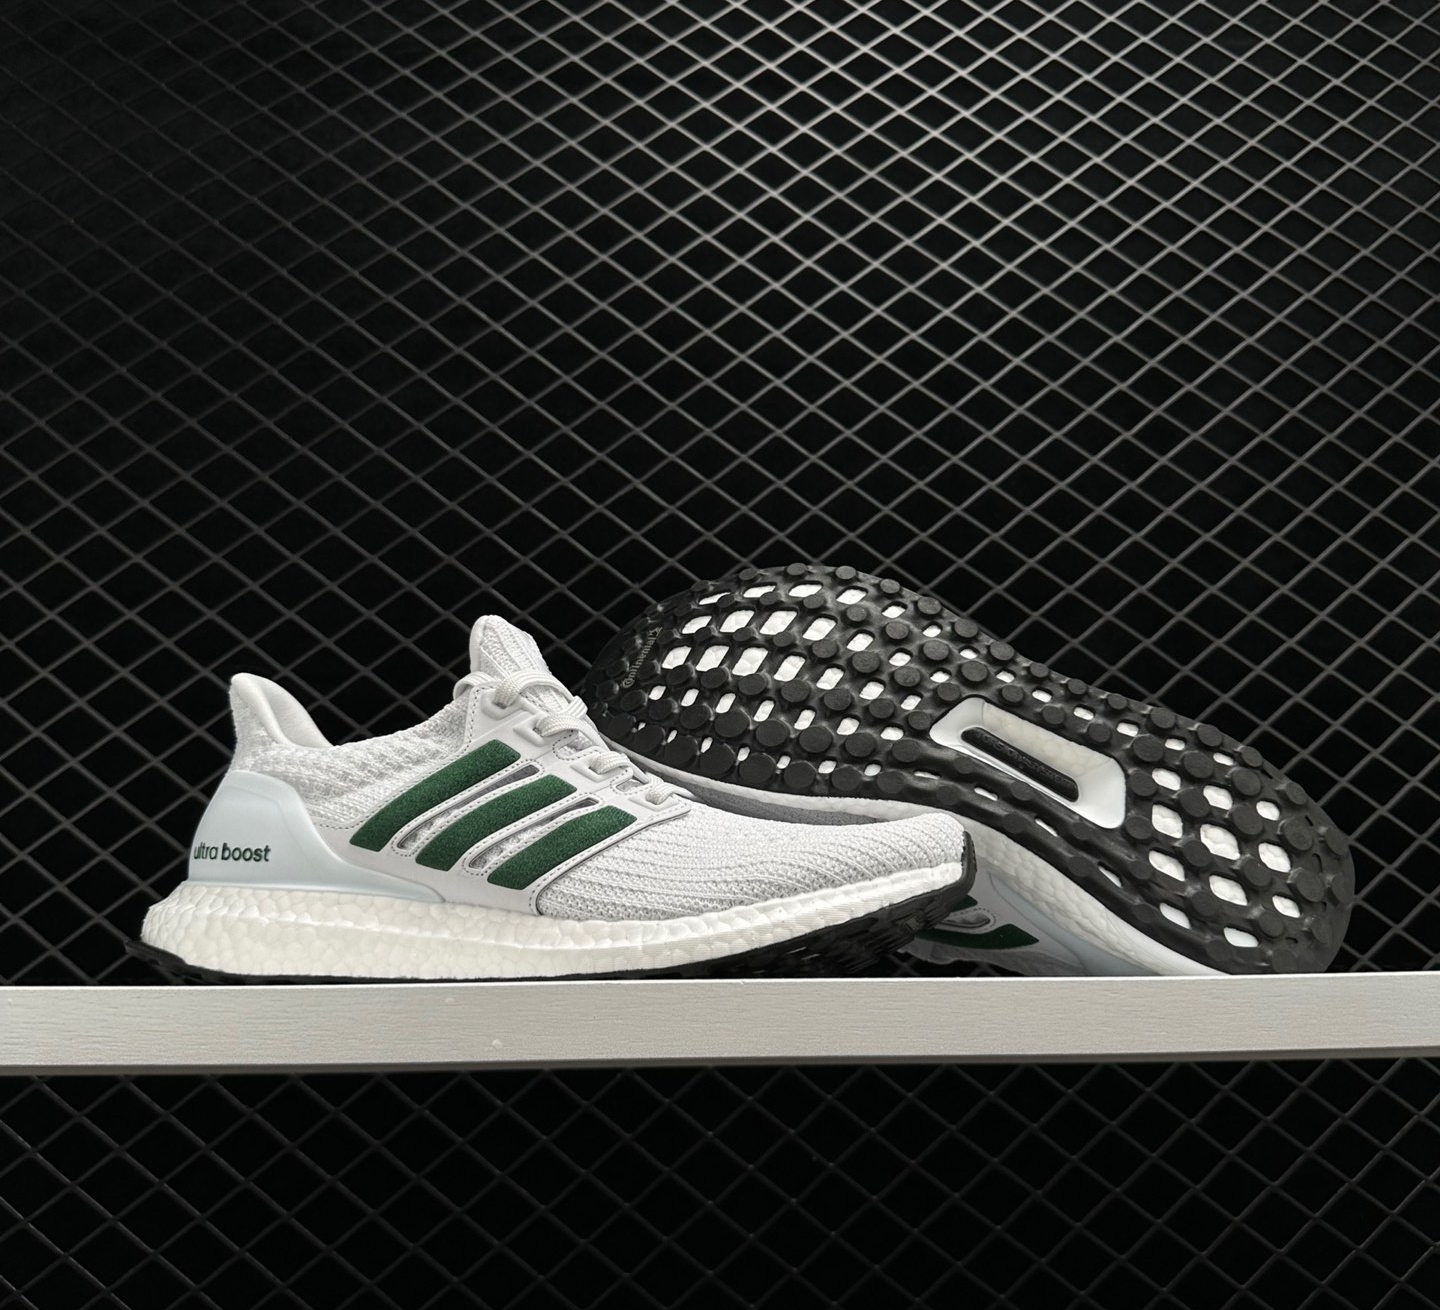 Adidas UltraBoost 4.0 DNA White Green FY9338 - Latest Release